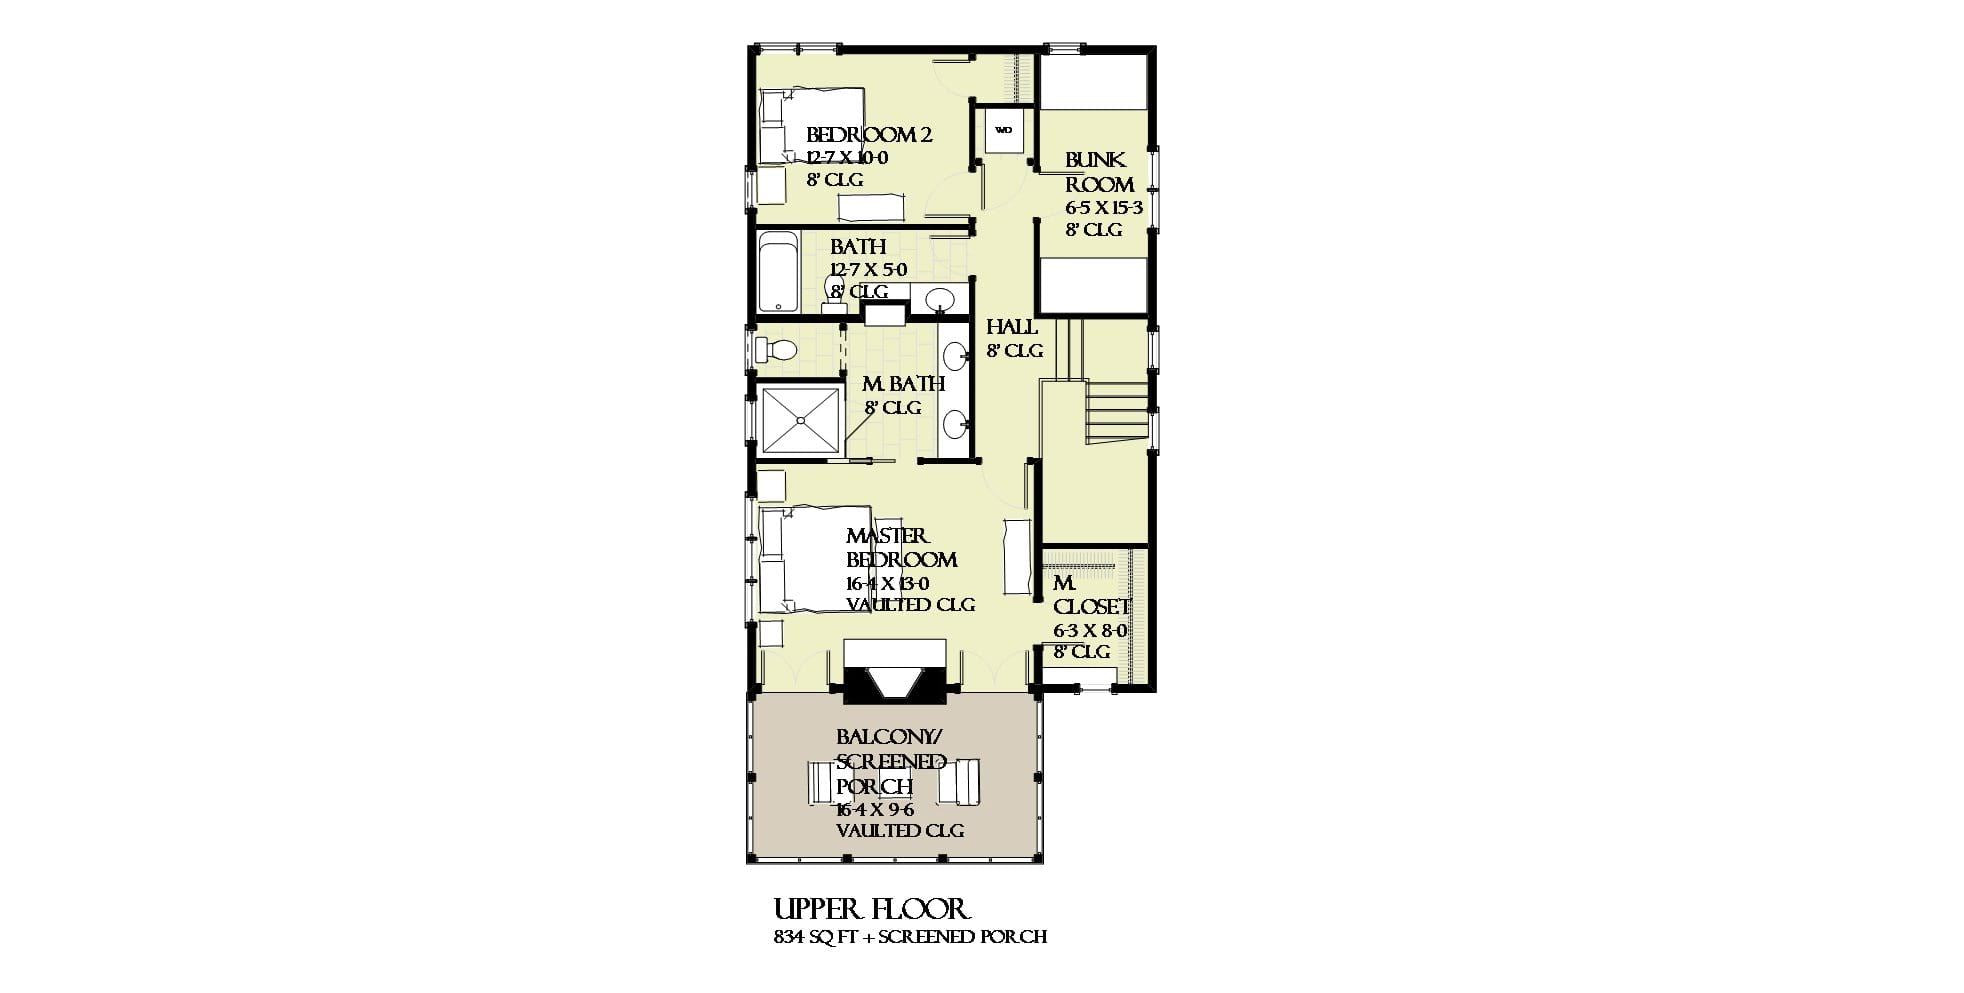 Tidepool - Home Design and Floor Plan - SketchPad House Plans